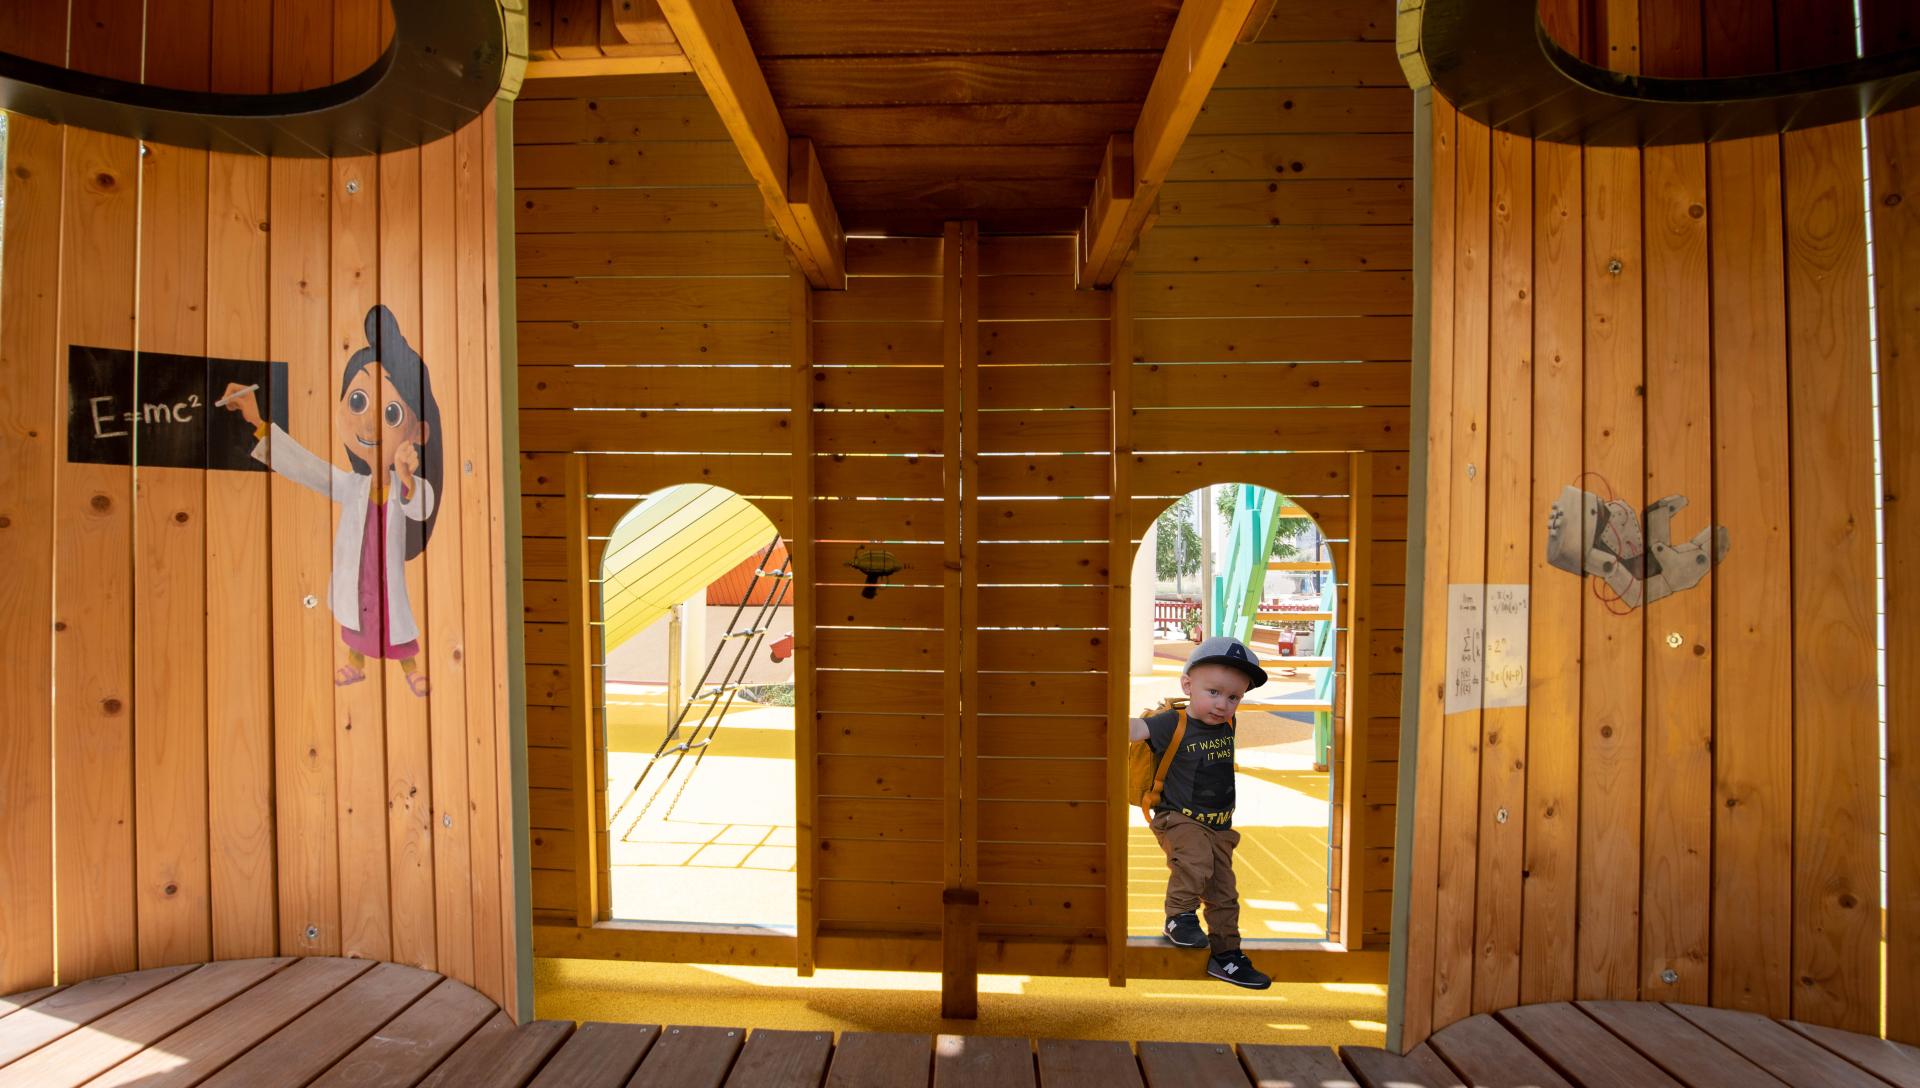 Inside details of playground at Expo 2020, MONSTRUM playgrounds